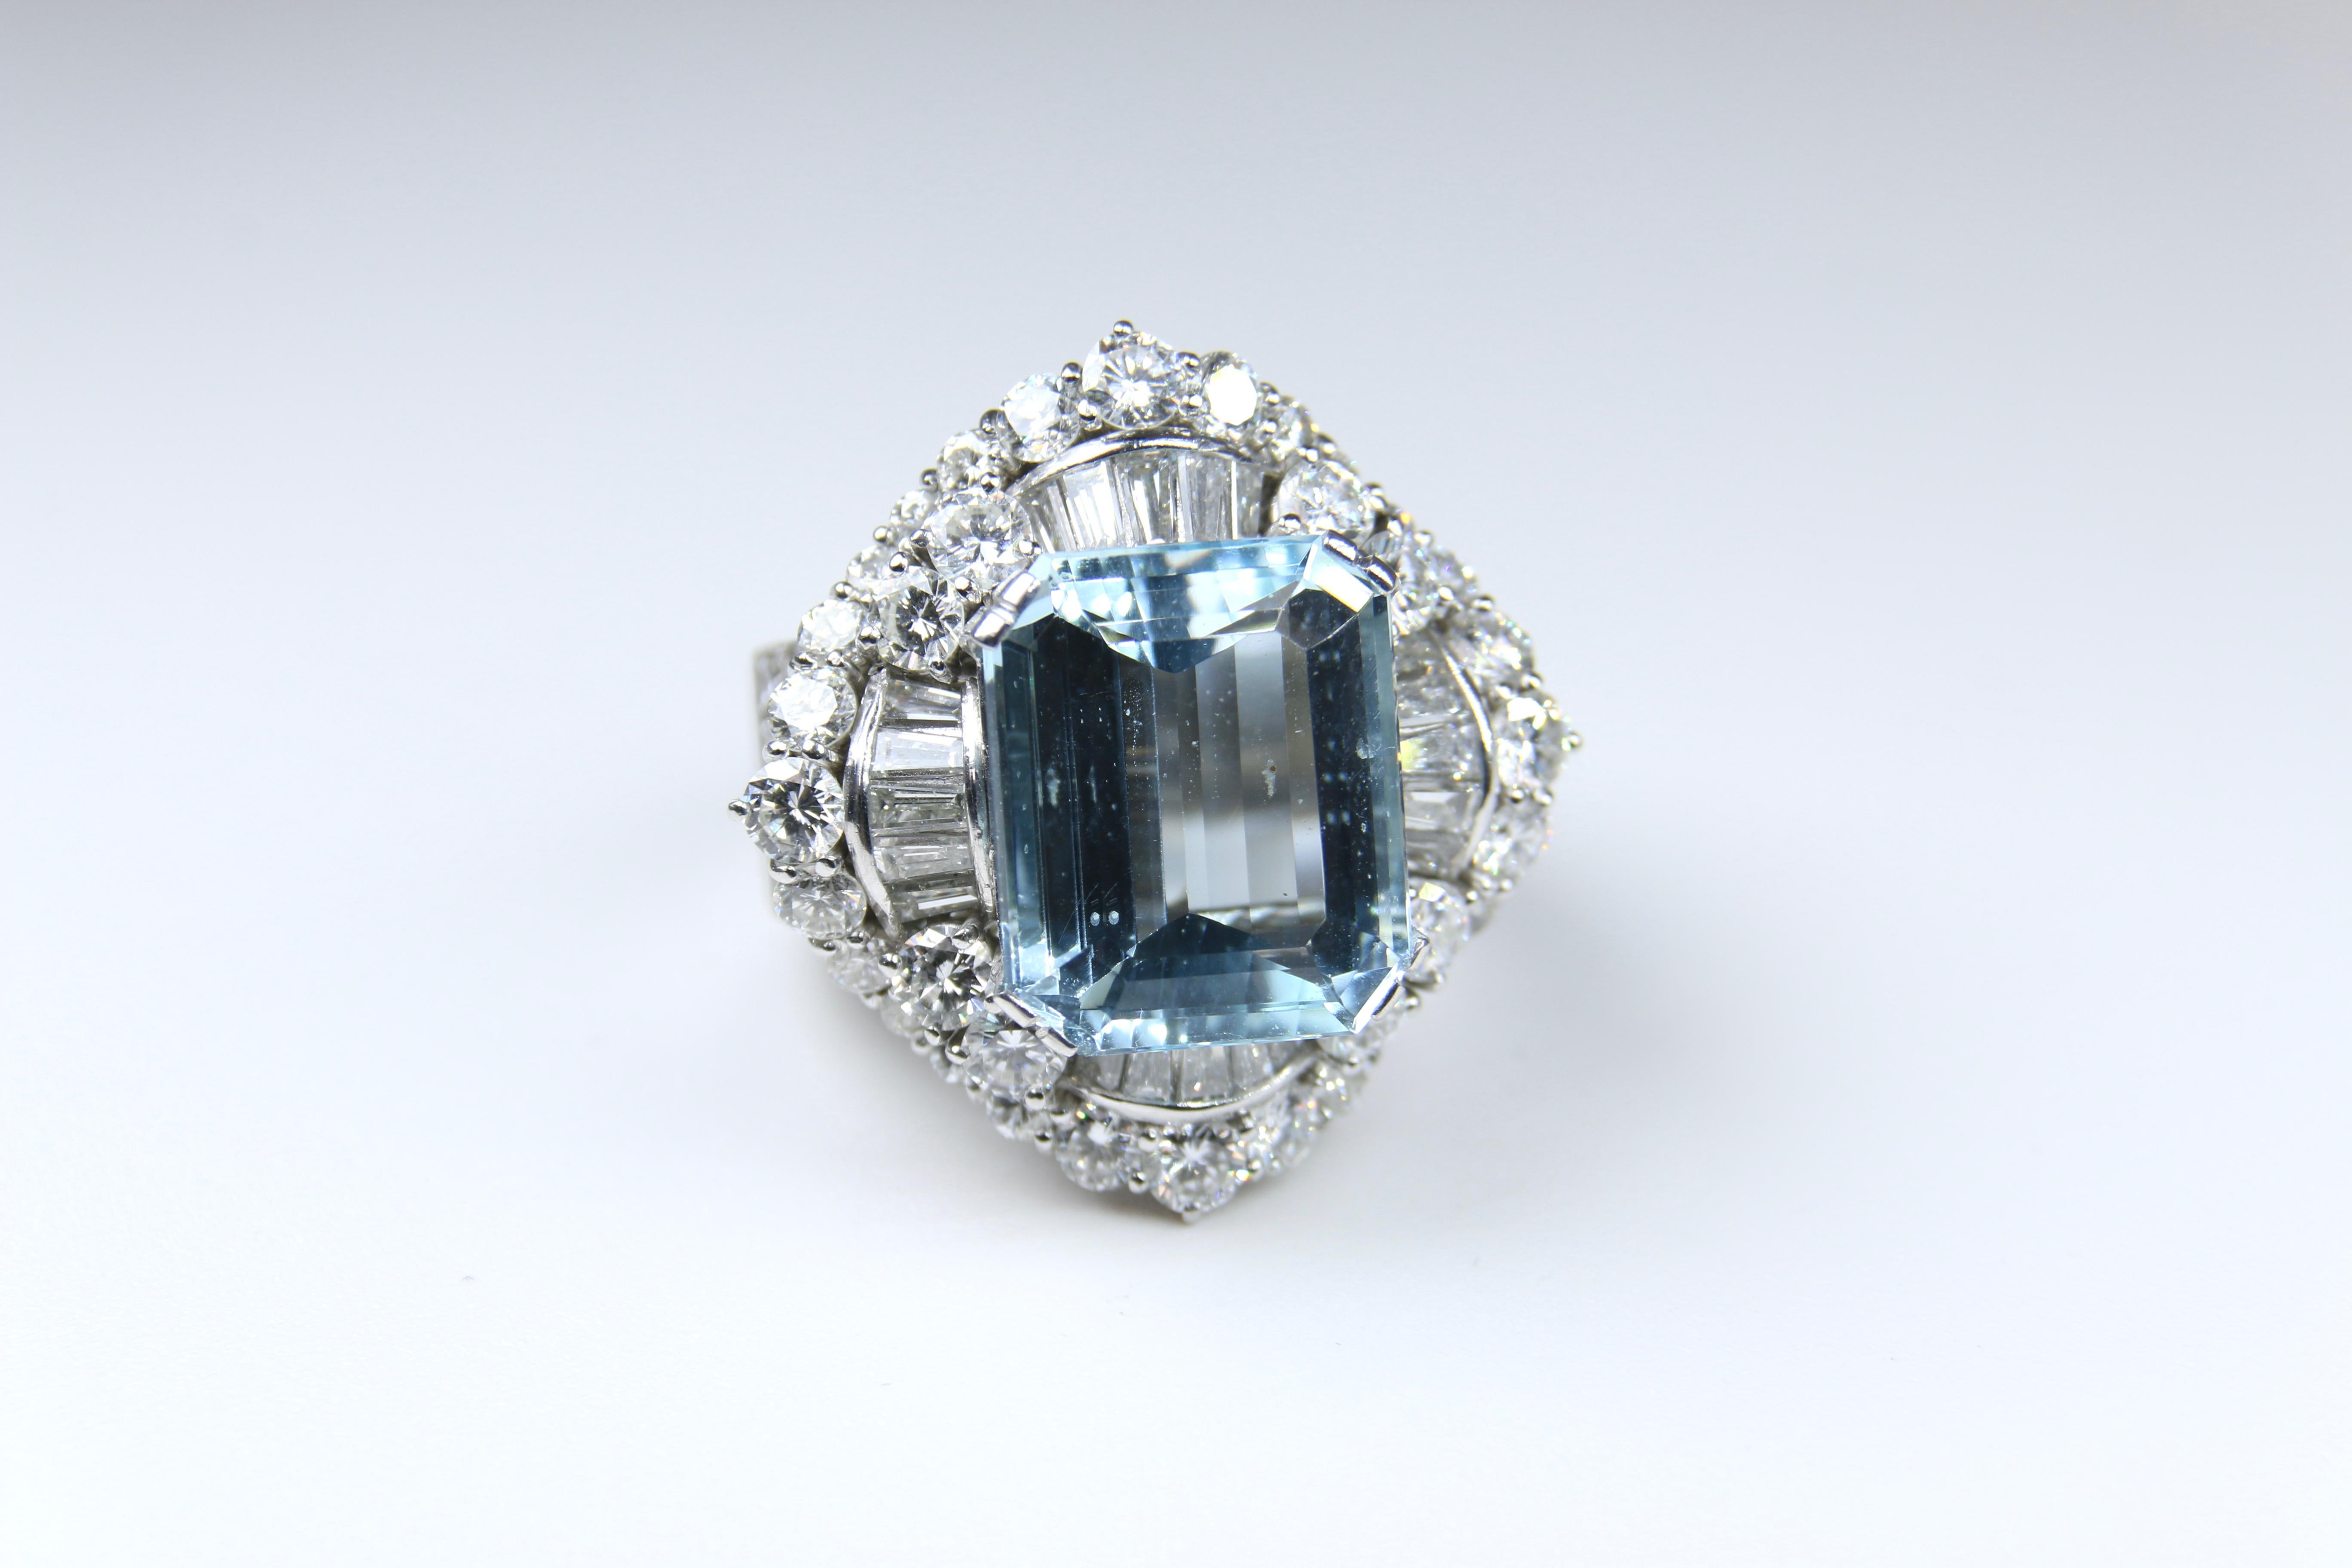 Stunning White Gold Setting with Diamonds and a fabulous Aquamarine Ring.  A mixture of baguettes and rounds make this cocktail ring quite the conversation piece.  This ring appears to be built for a Queen in all it's majesty. Emerald Cut Aqua Sits